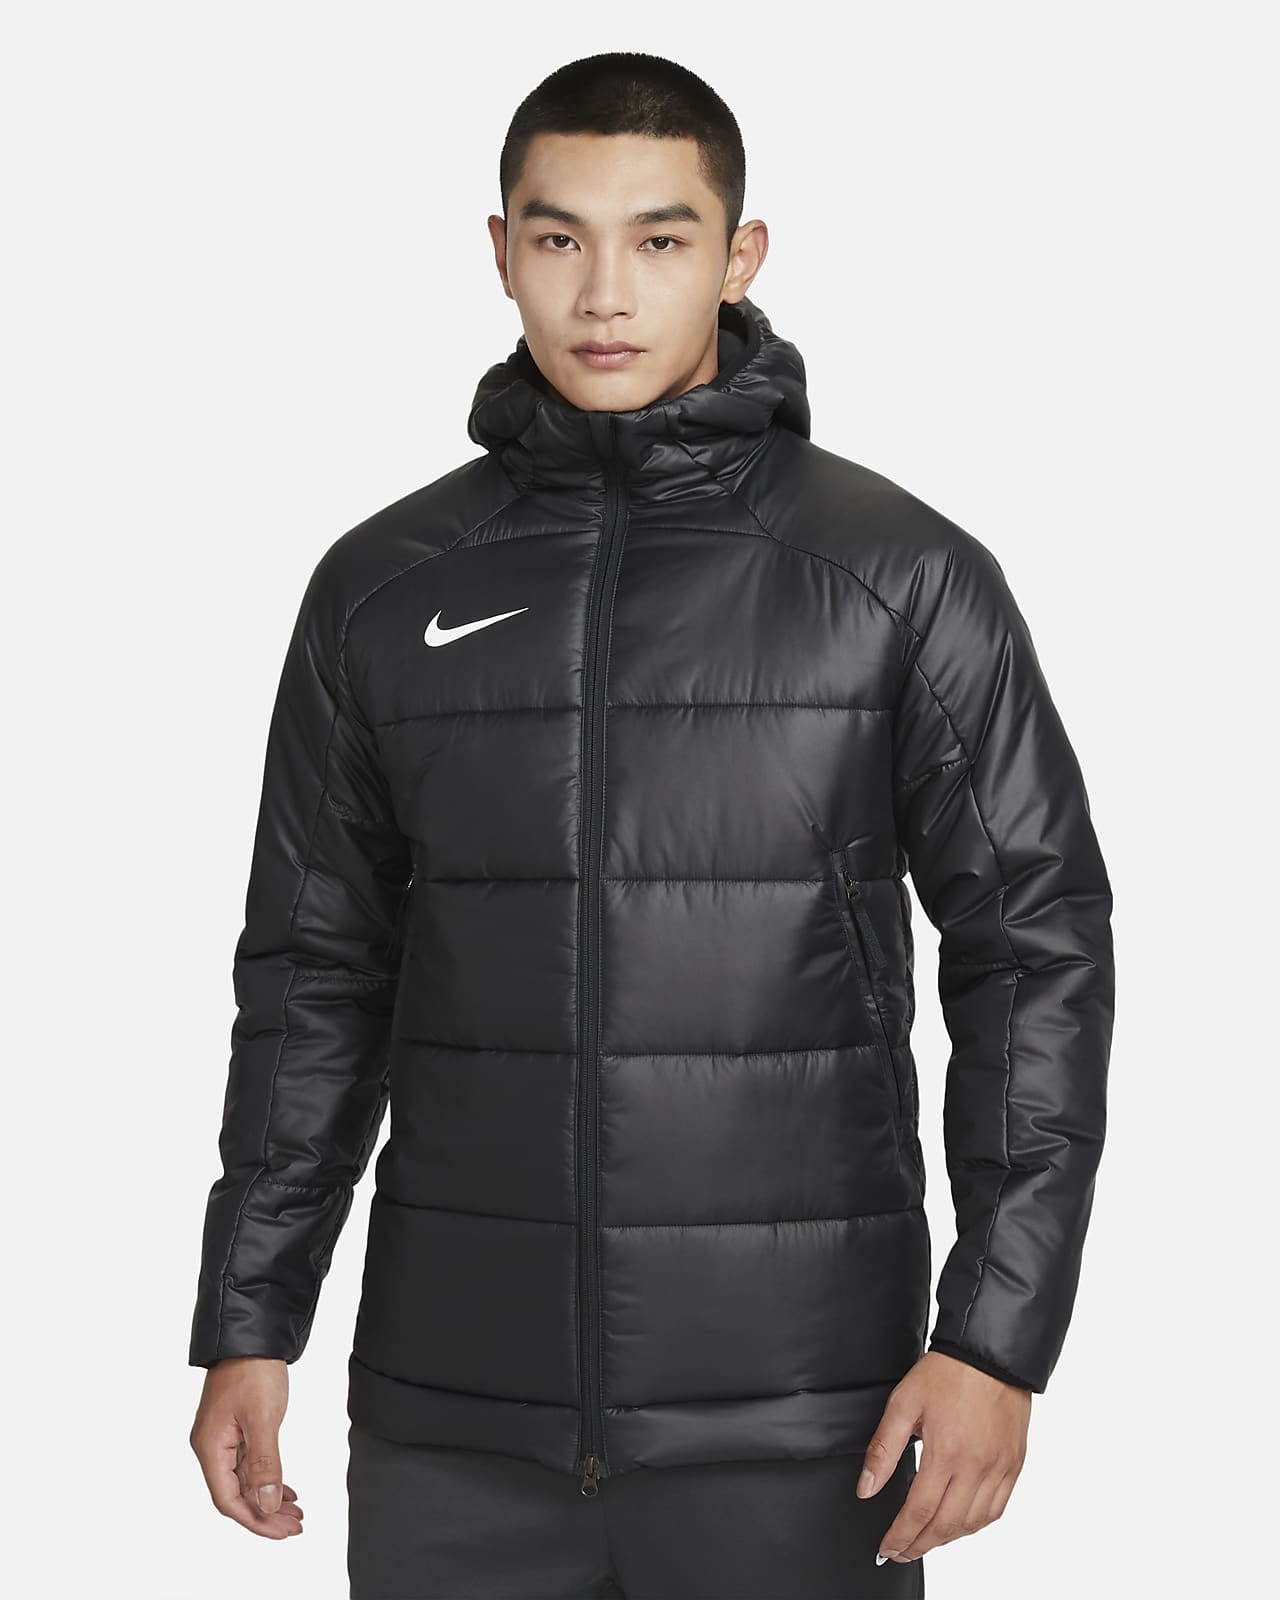 Nike Therma-FIT Academy Pro Men's 2-in-1 Insulated Soccer Jacket